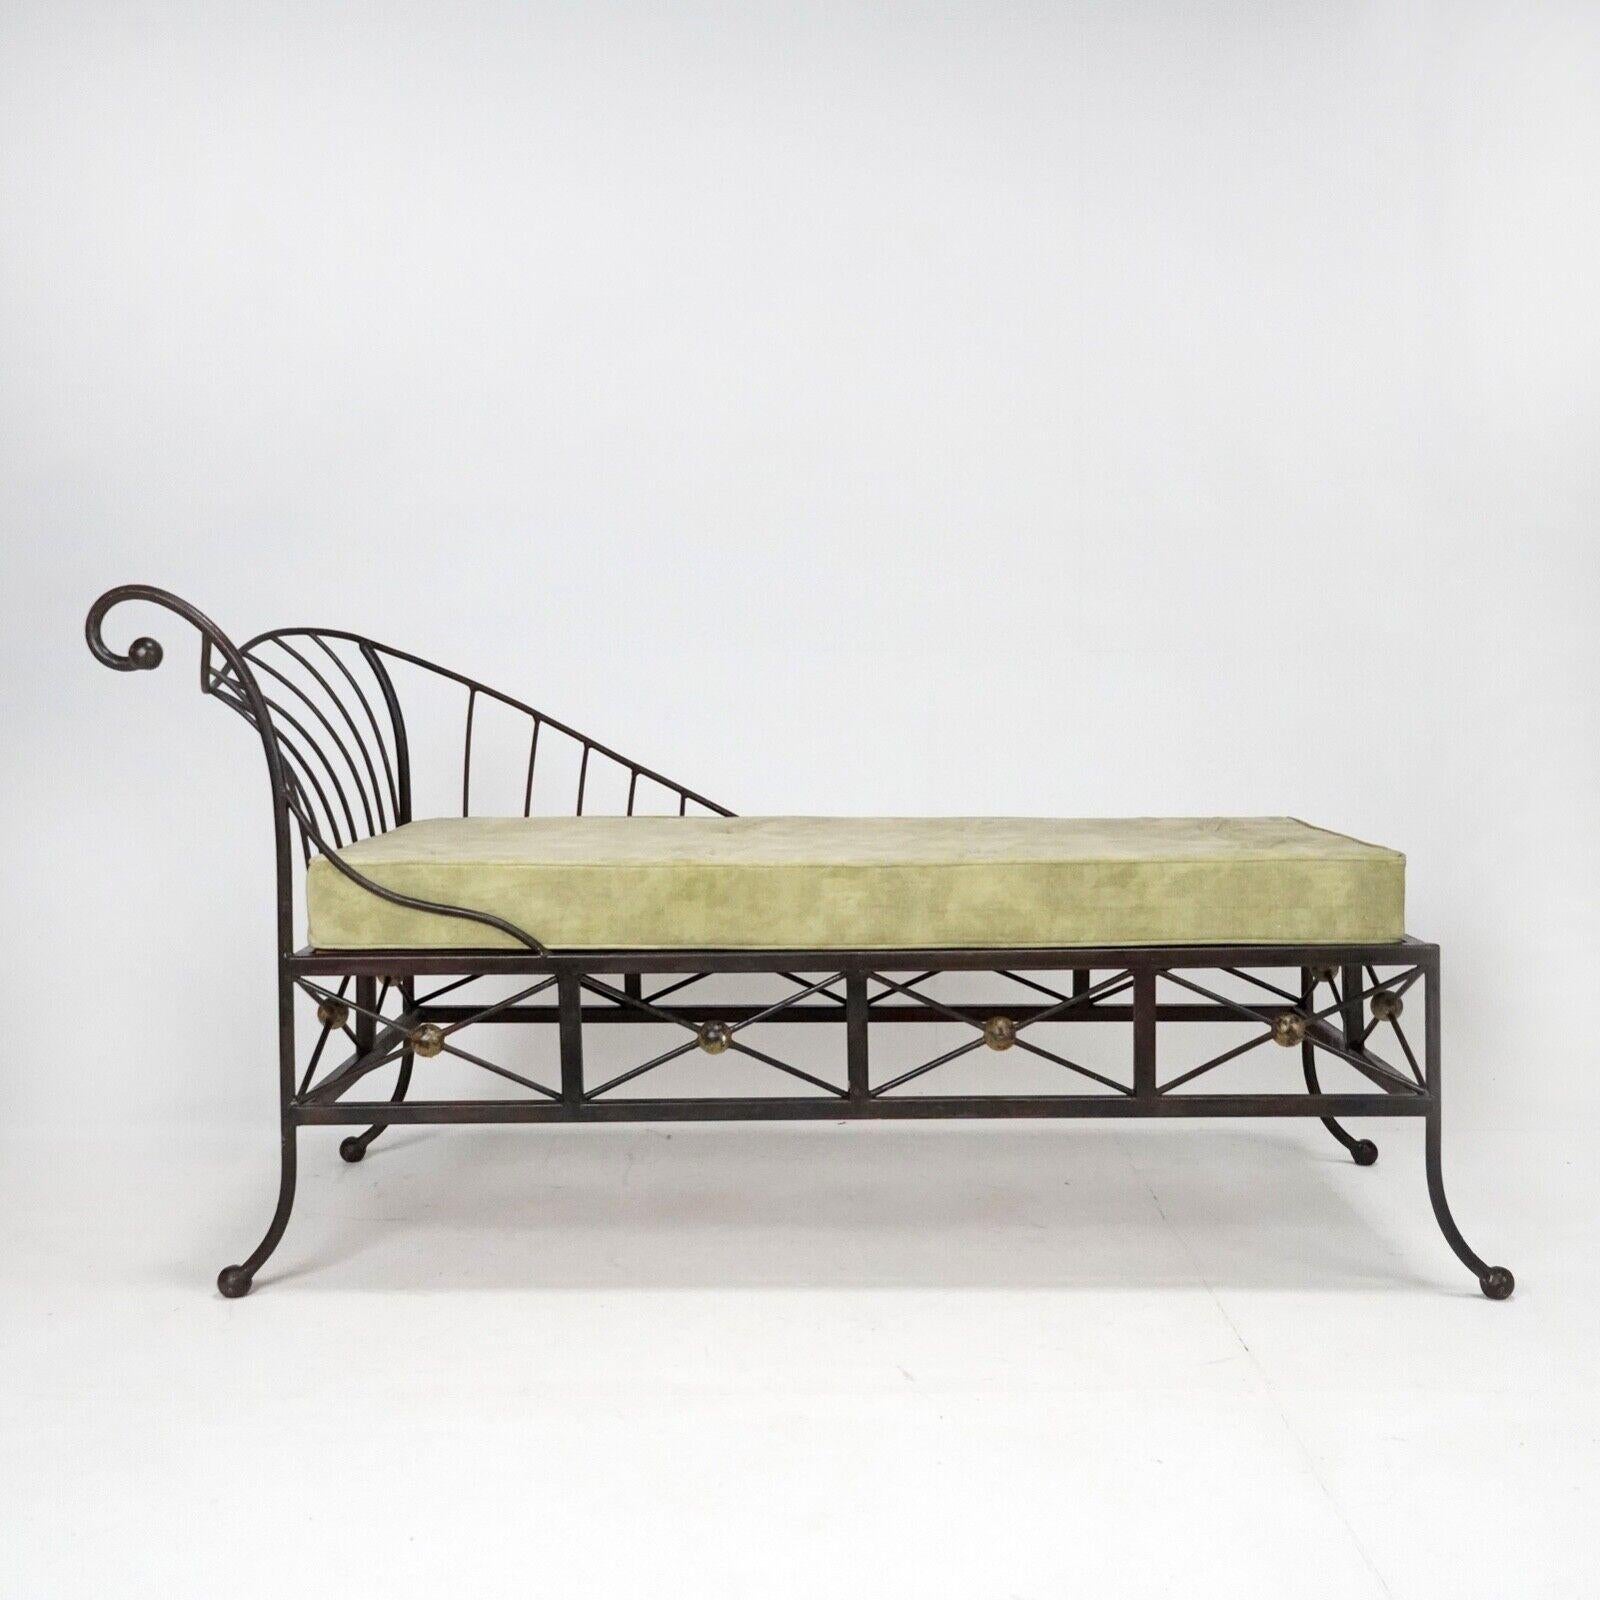 Vintage French Box Steel Metal Day Bed, Sun Lounger, Chaise Lounge Green Seat 10